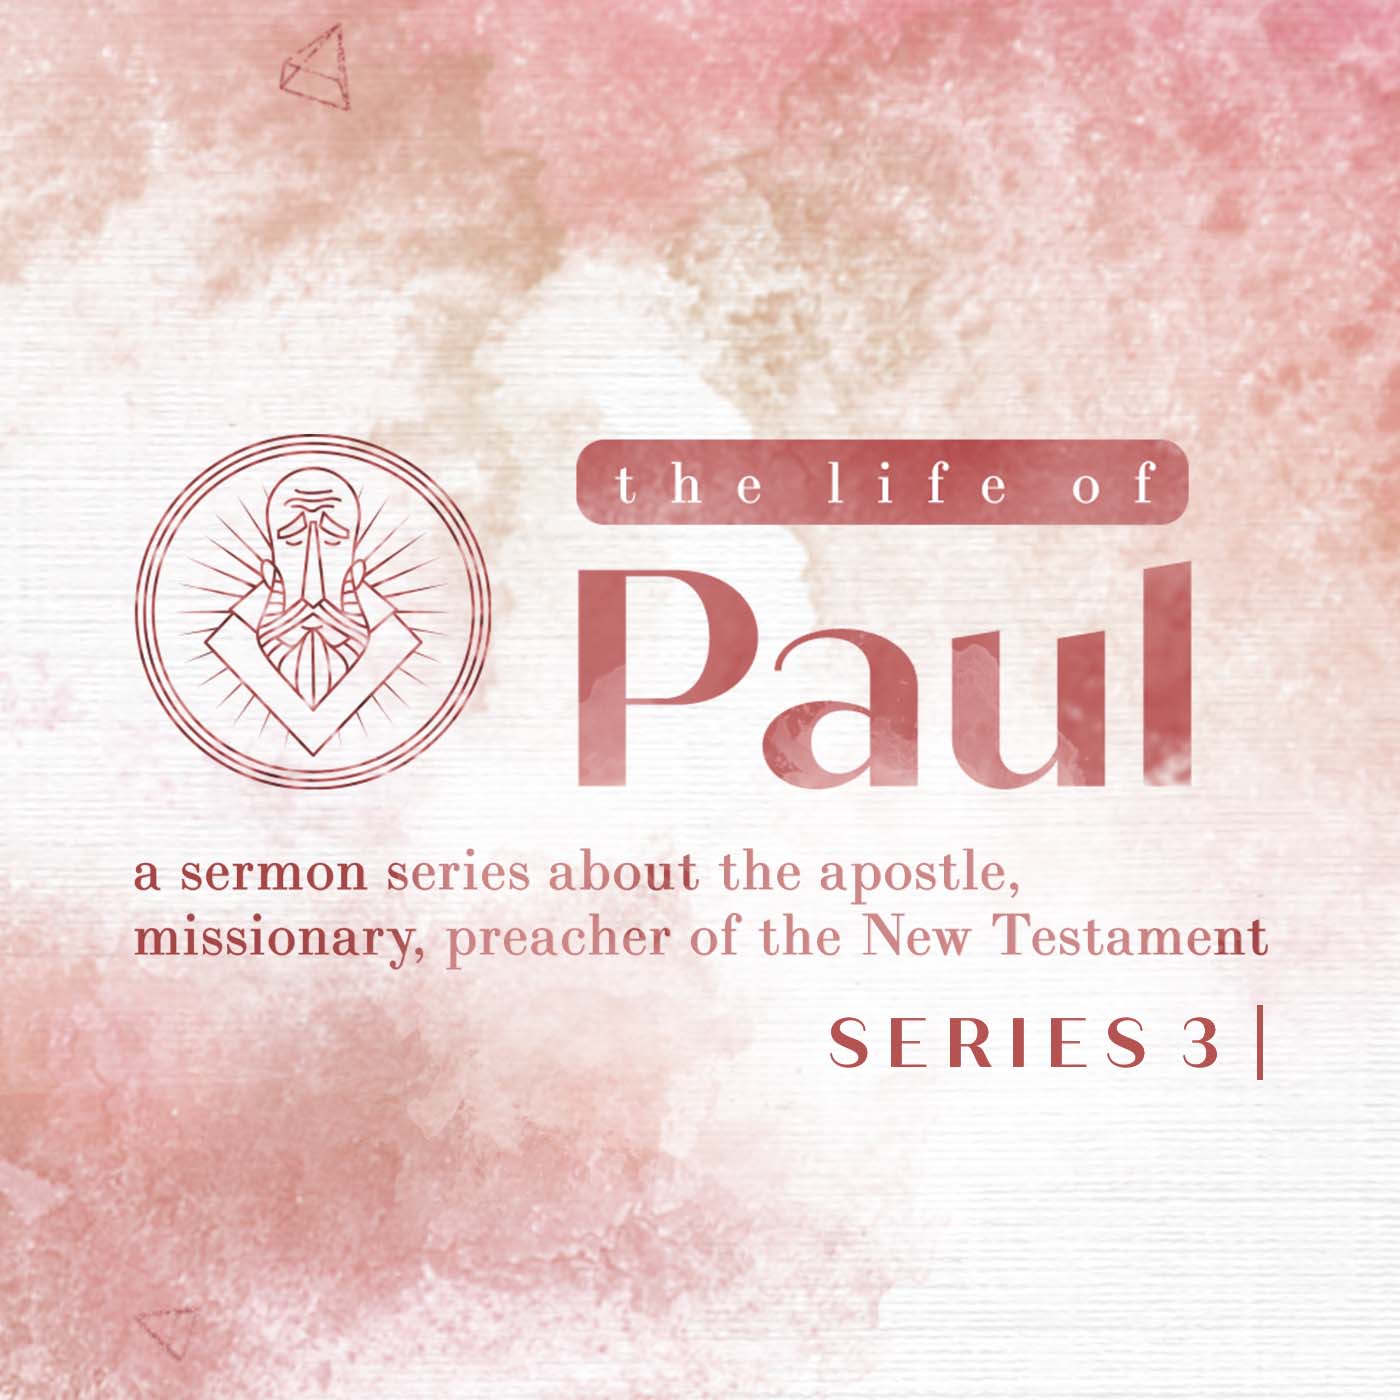 The Life of Paul: Series 3